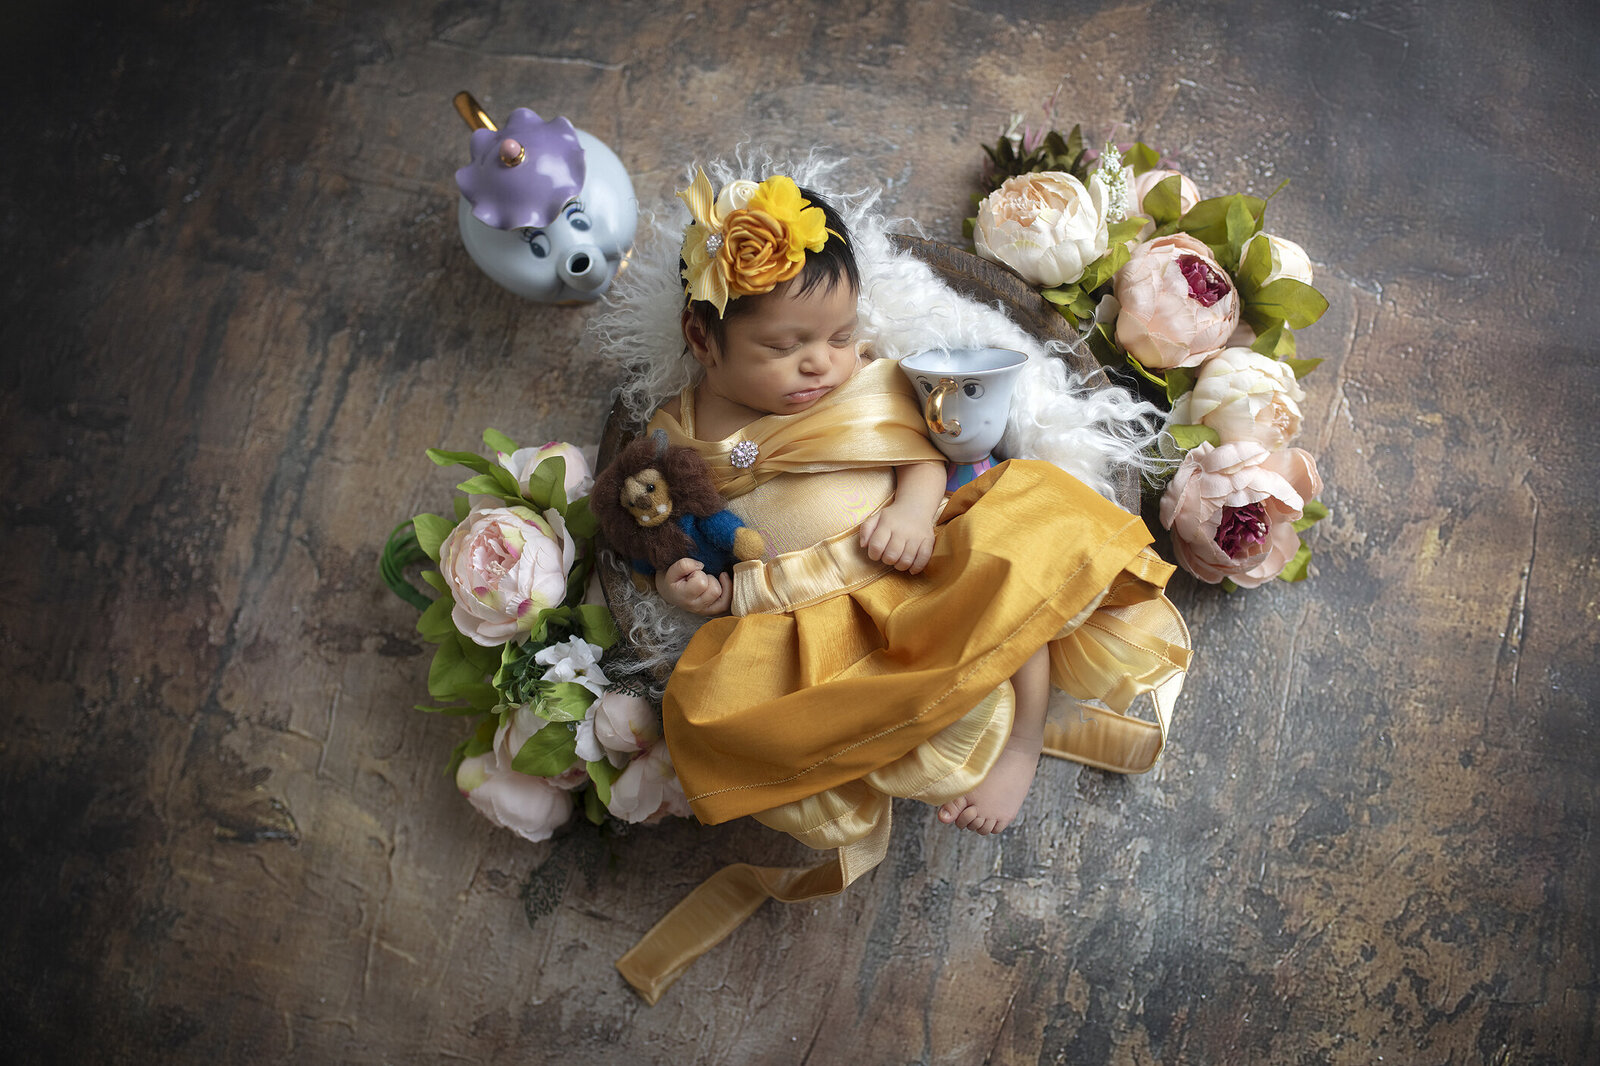 Newborn girl as Belle from Beauty and the Beast.